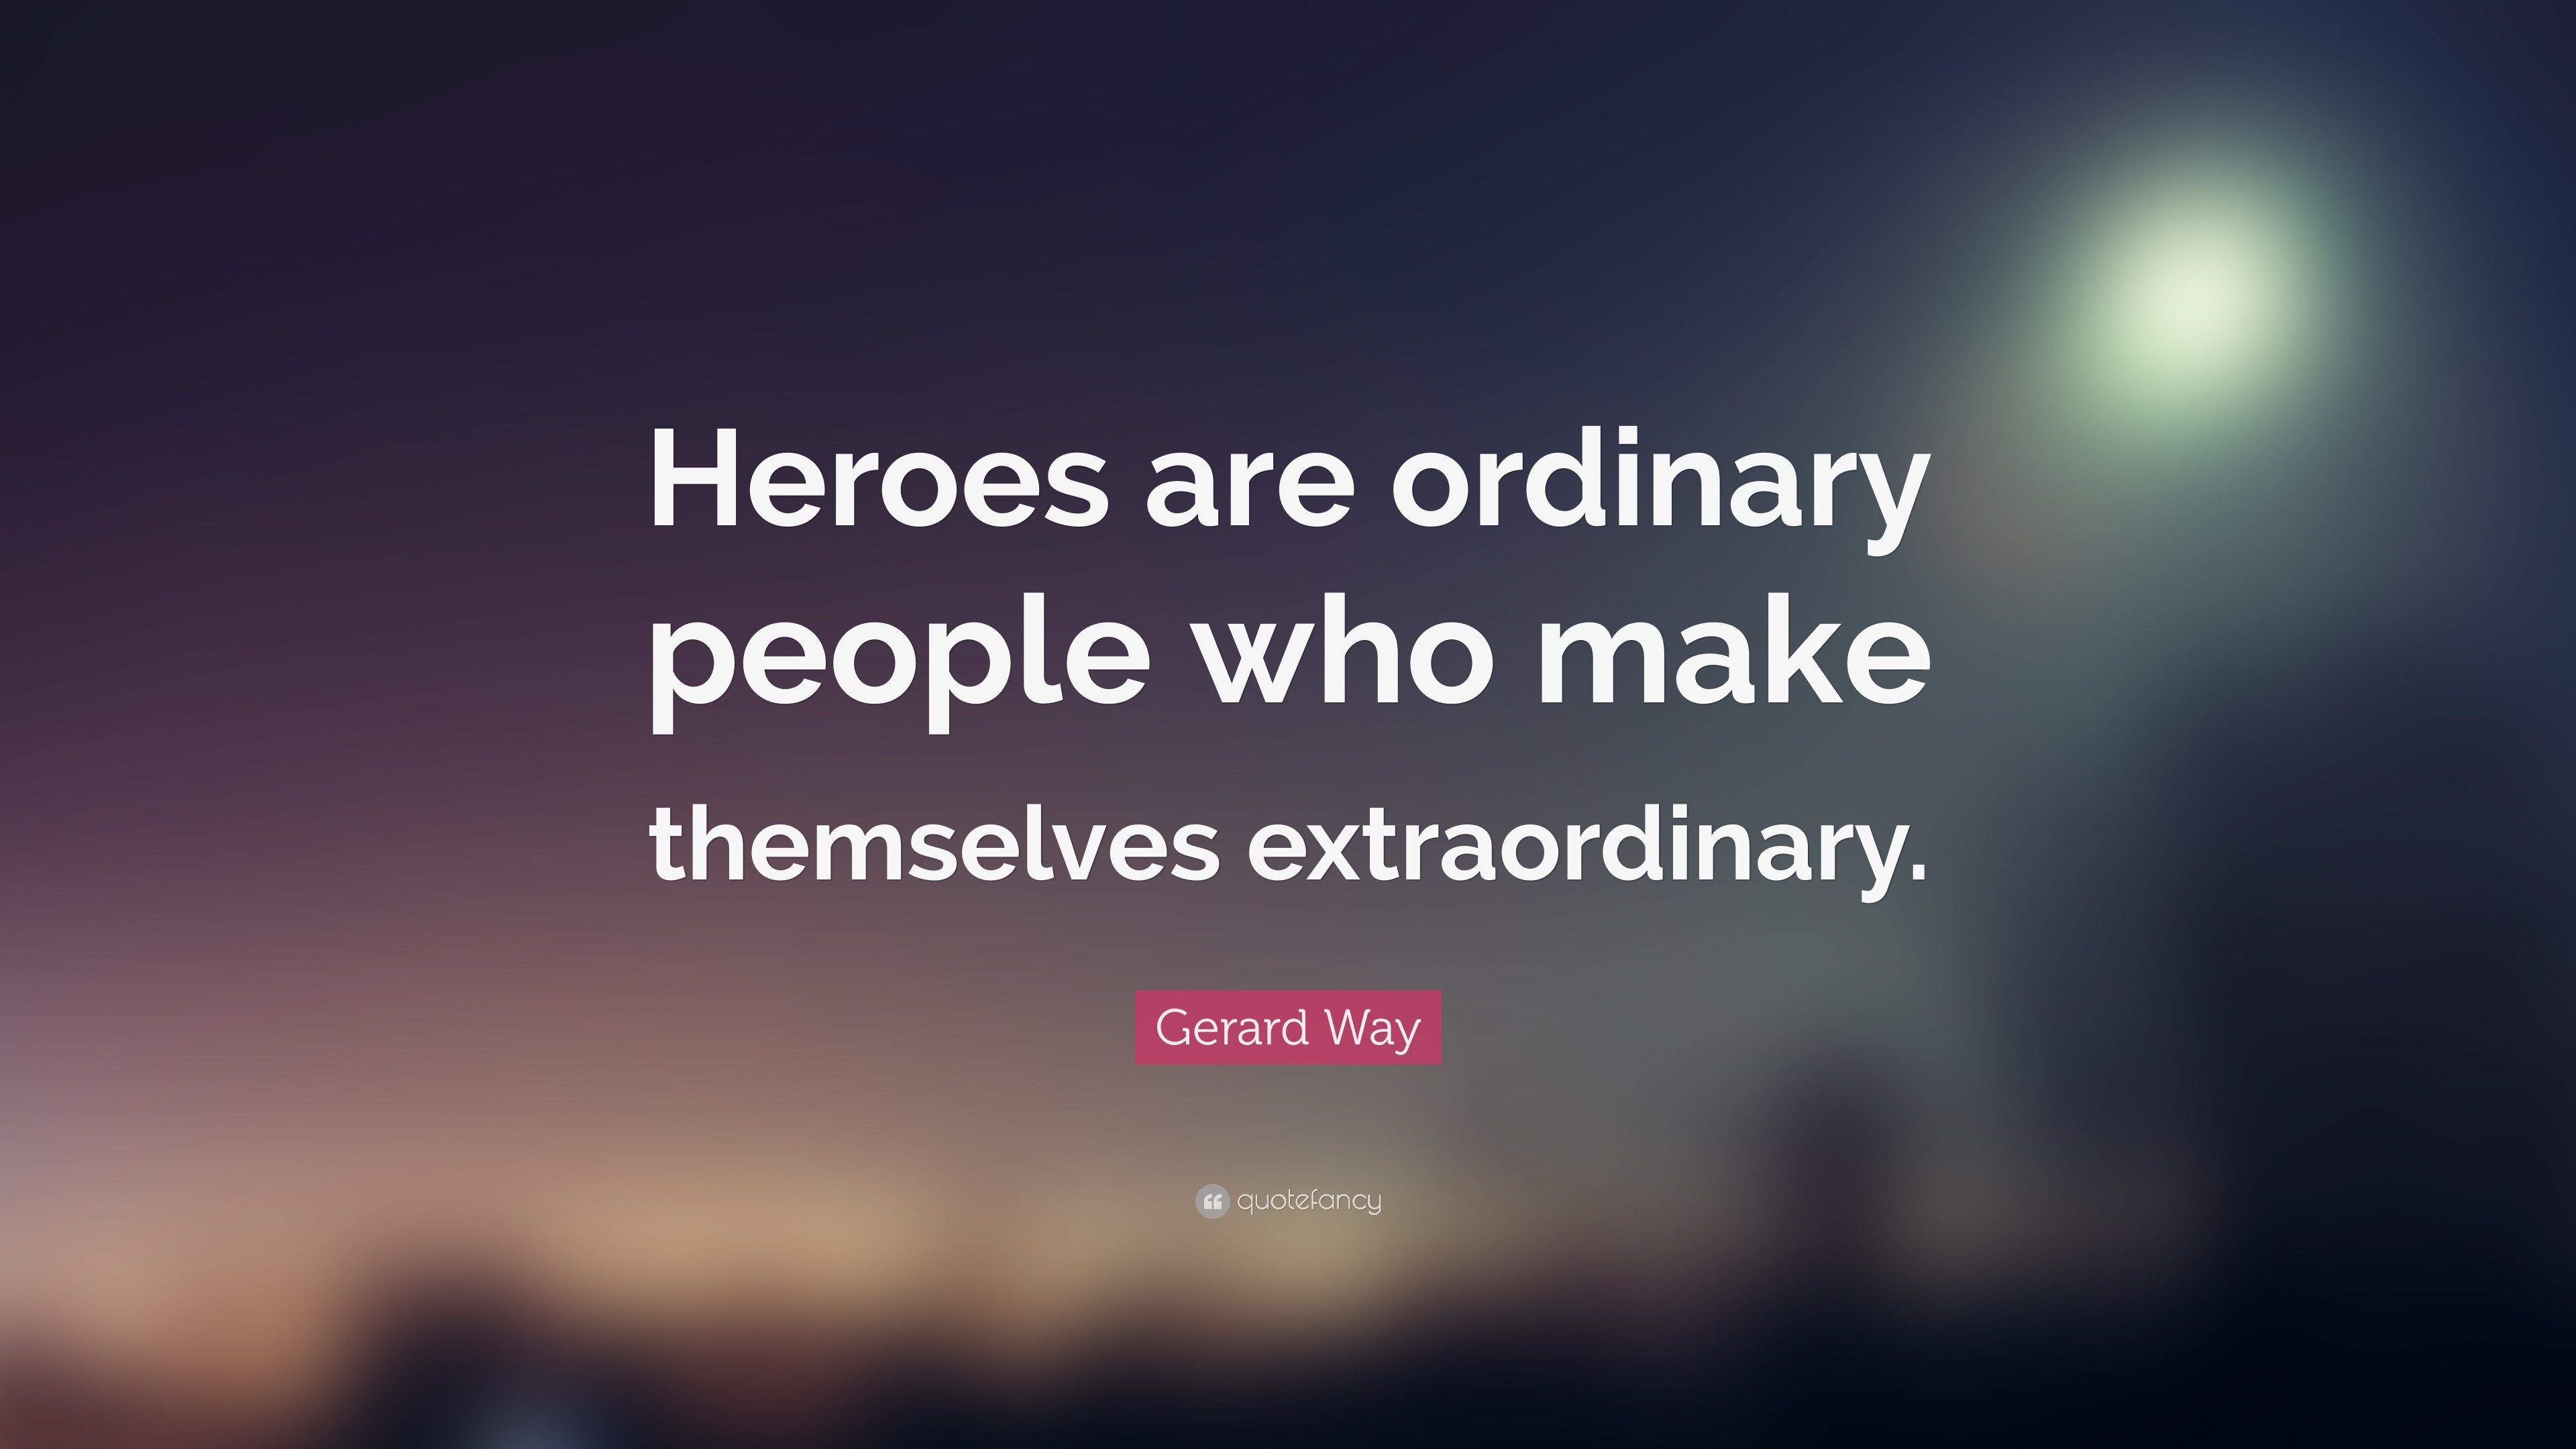 3840x2160 Gerard Way Quote: “Heroes are ordinary people who make themselves  extraordinary.”